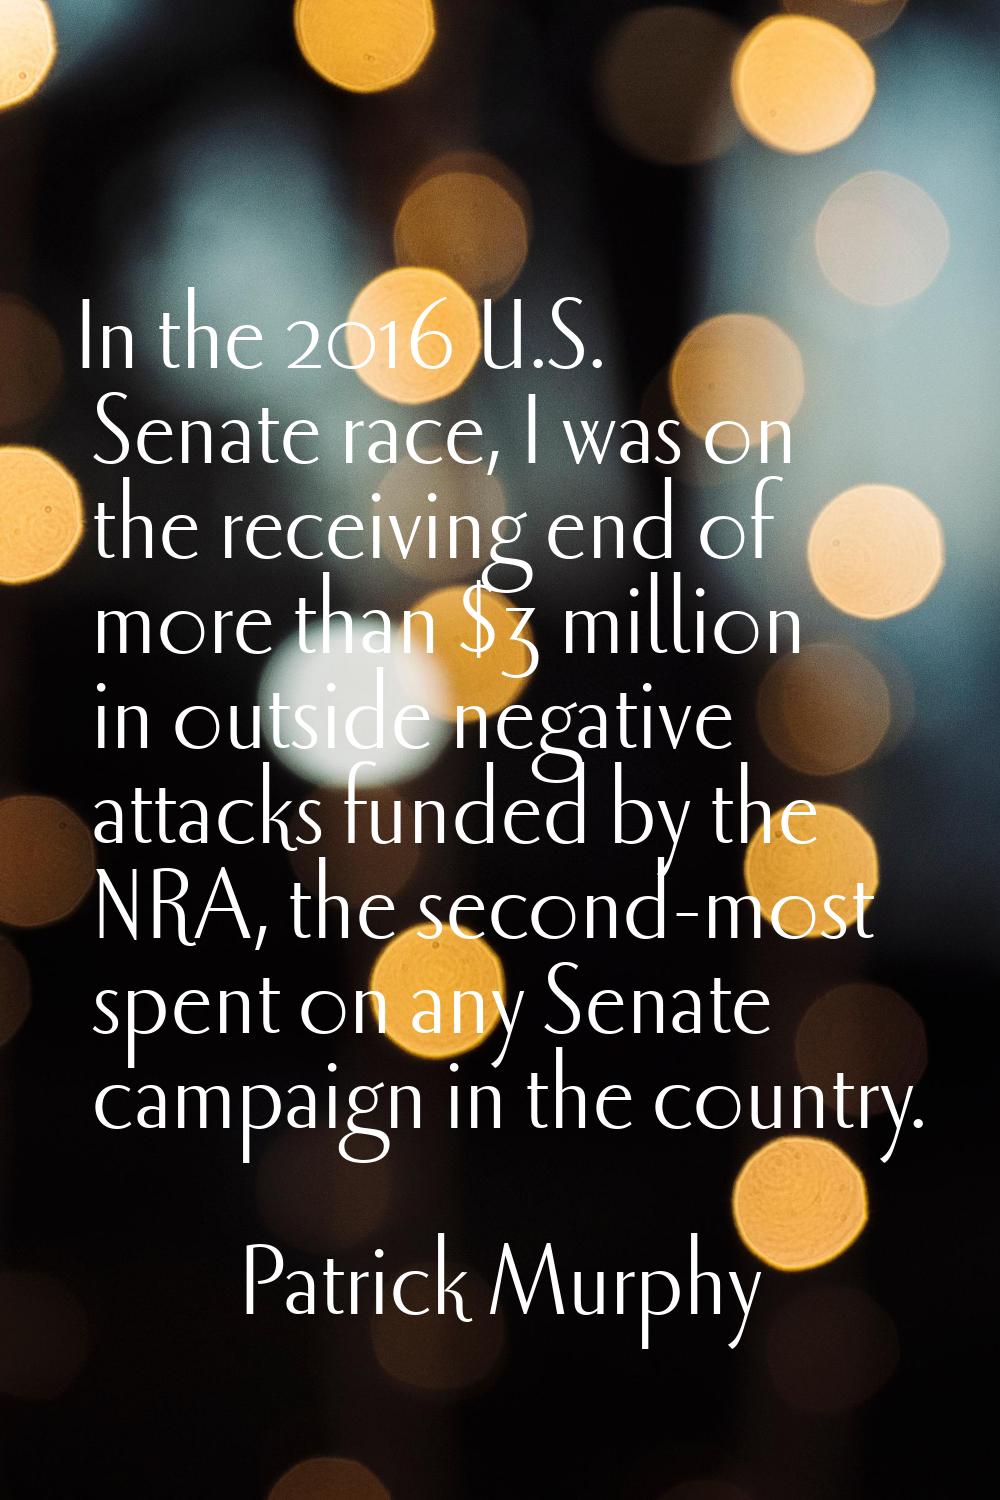 In the 2016 U.S. Senate race, I was on the receiving end of more than $3 million in outside negativ